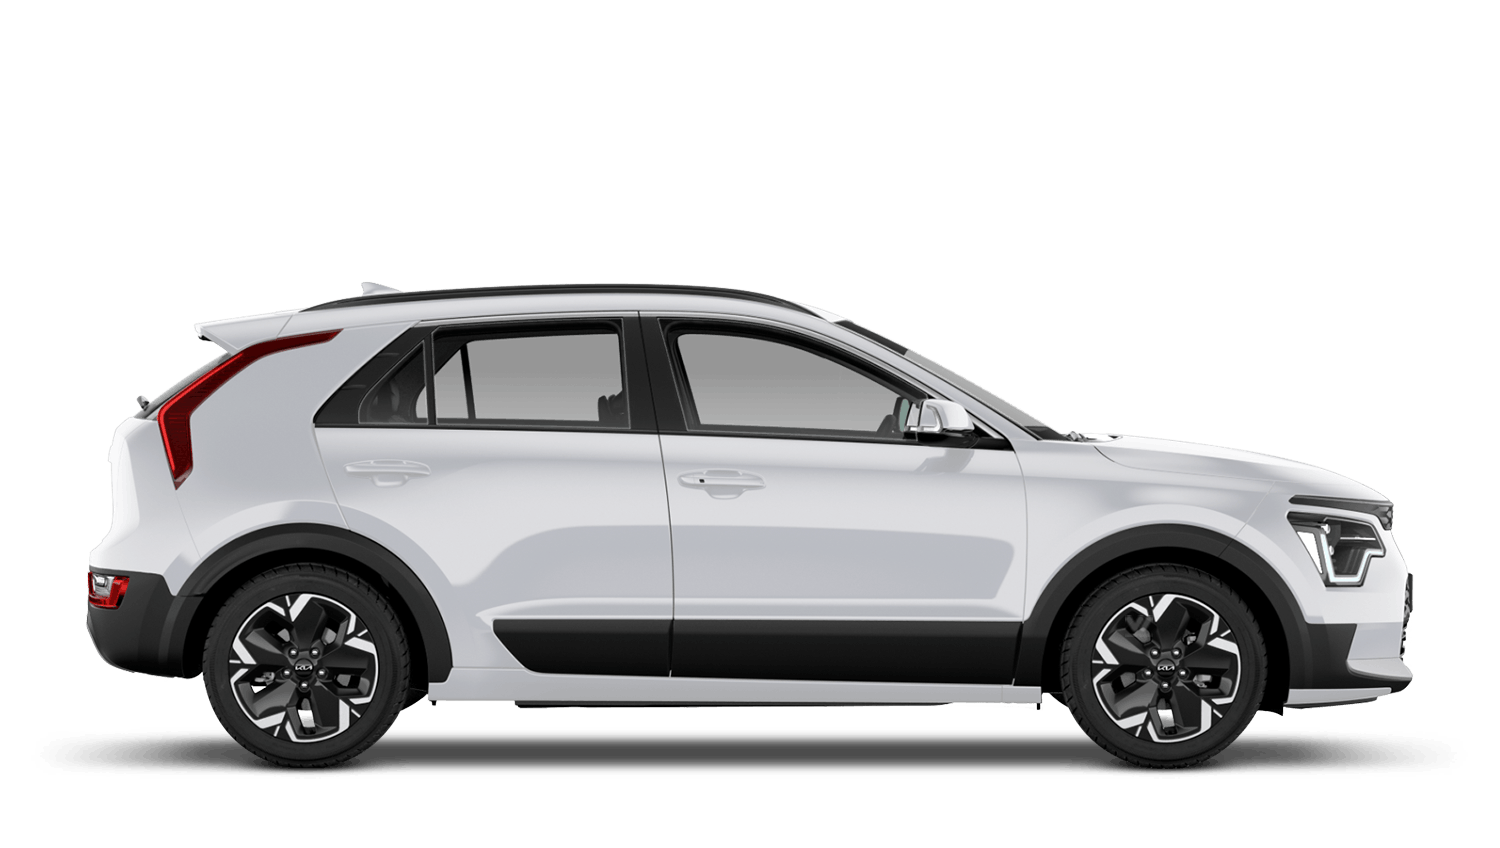 The All-New Niro EV. Powered by inspiration - up to 285 mile range on a single charge